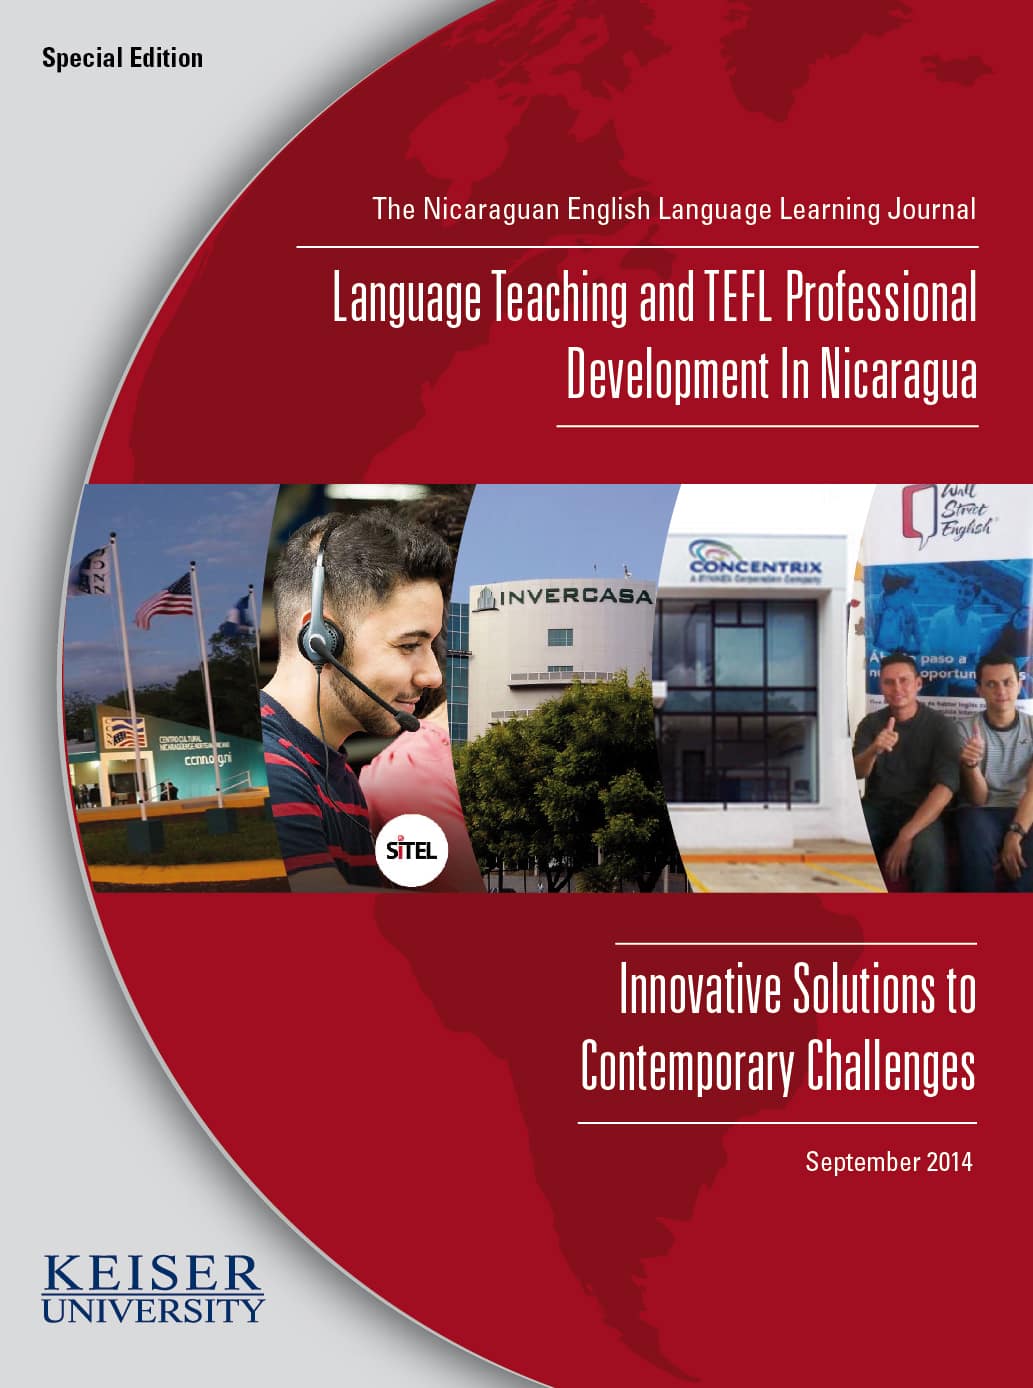 Dr. Arthur Keiser is Pleased to Announce, KU’s International Language Institute in Nicaragua Publishes, “The Nicaraguan English Language Learning Journal”